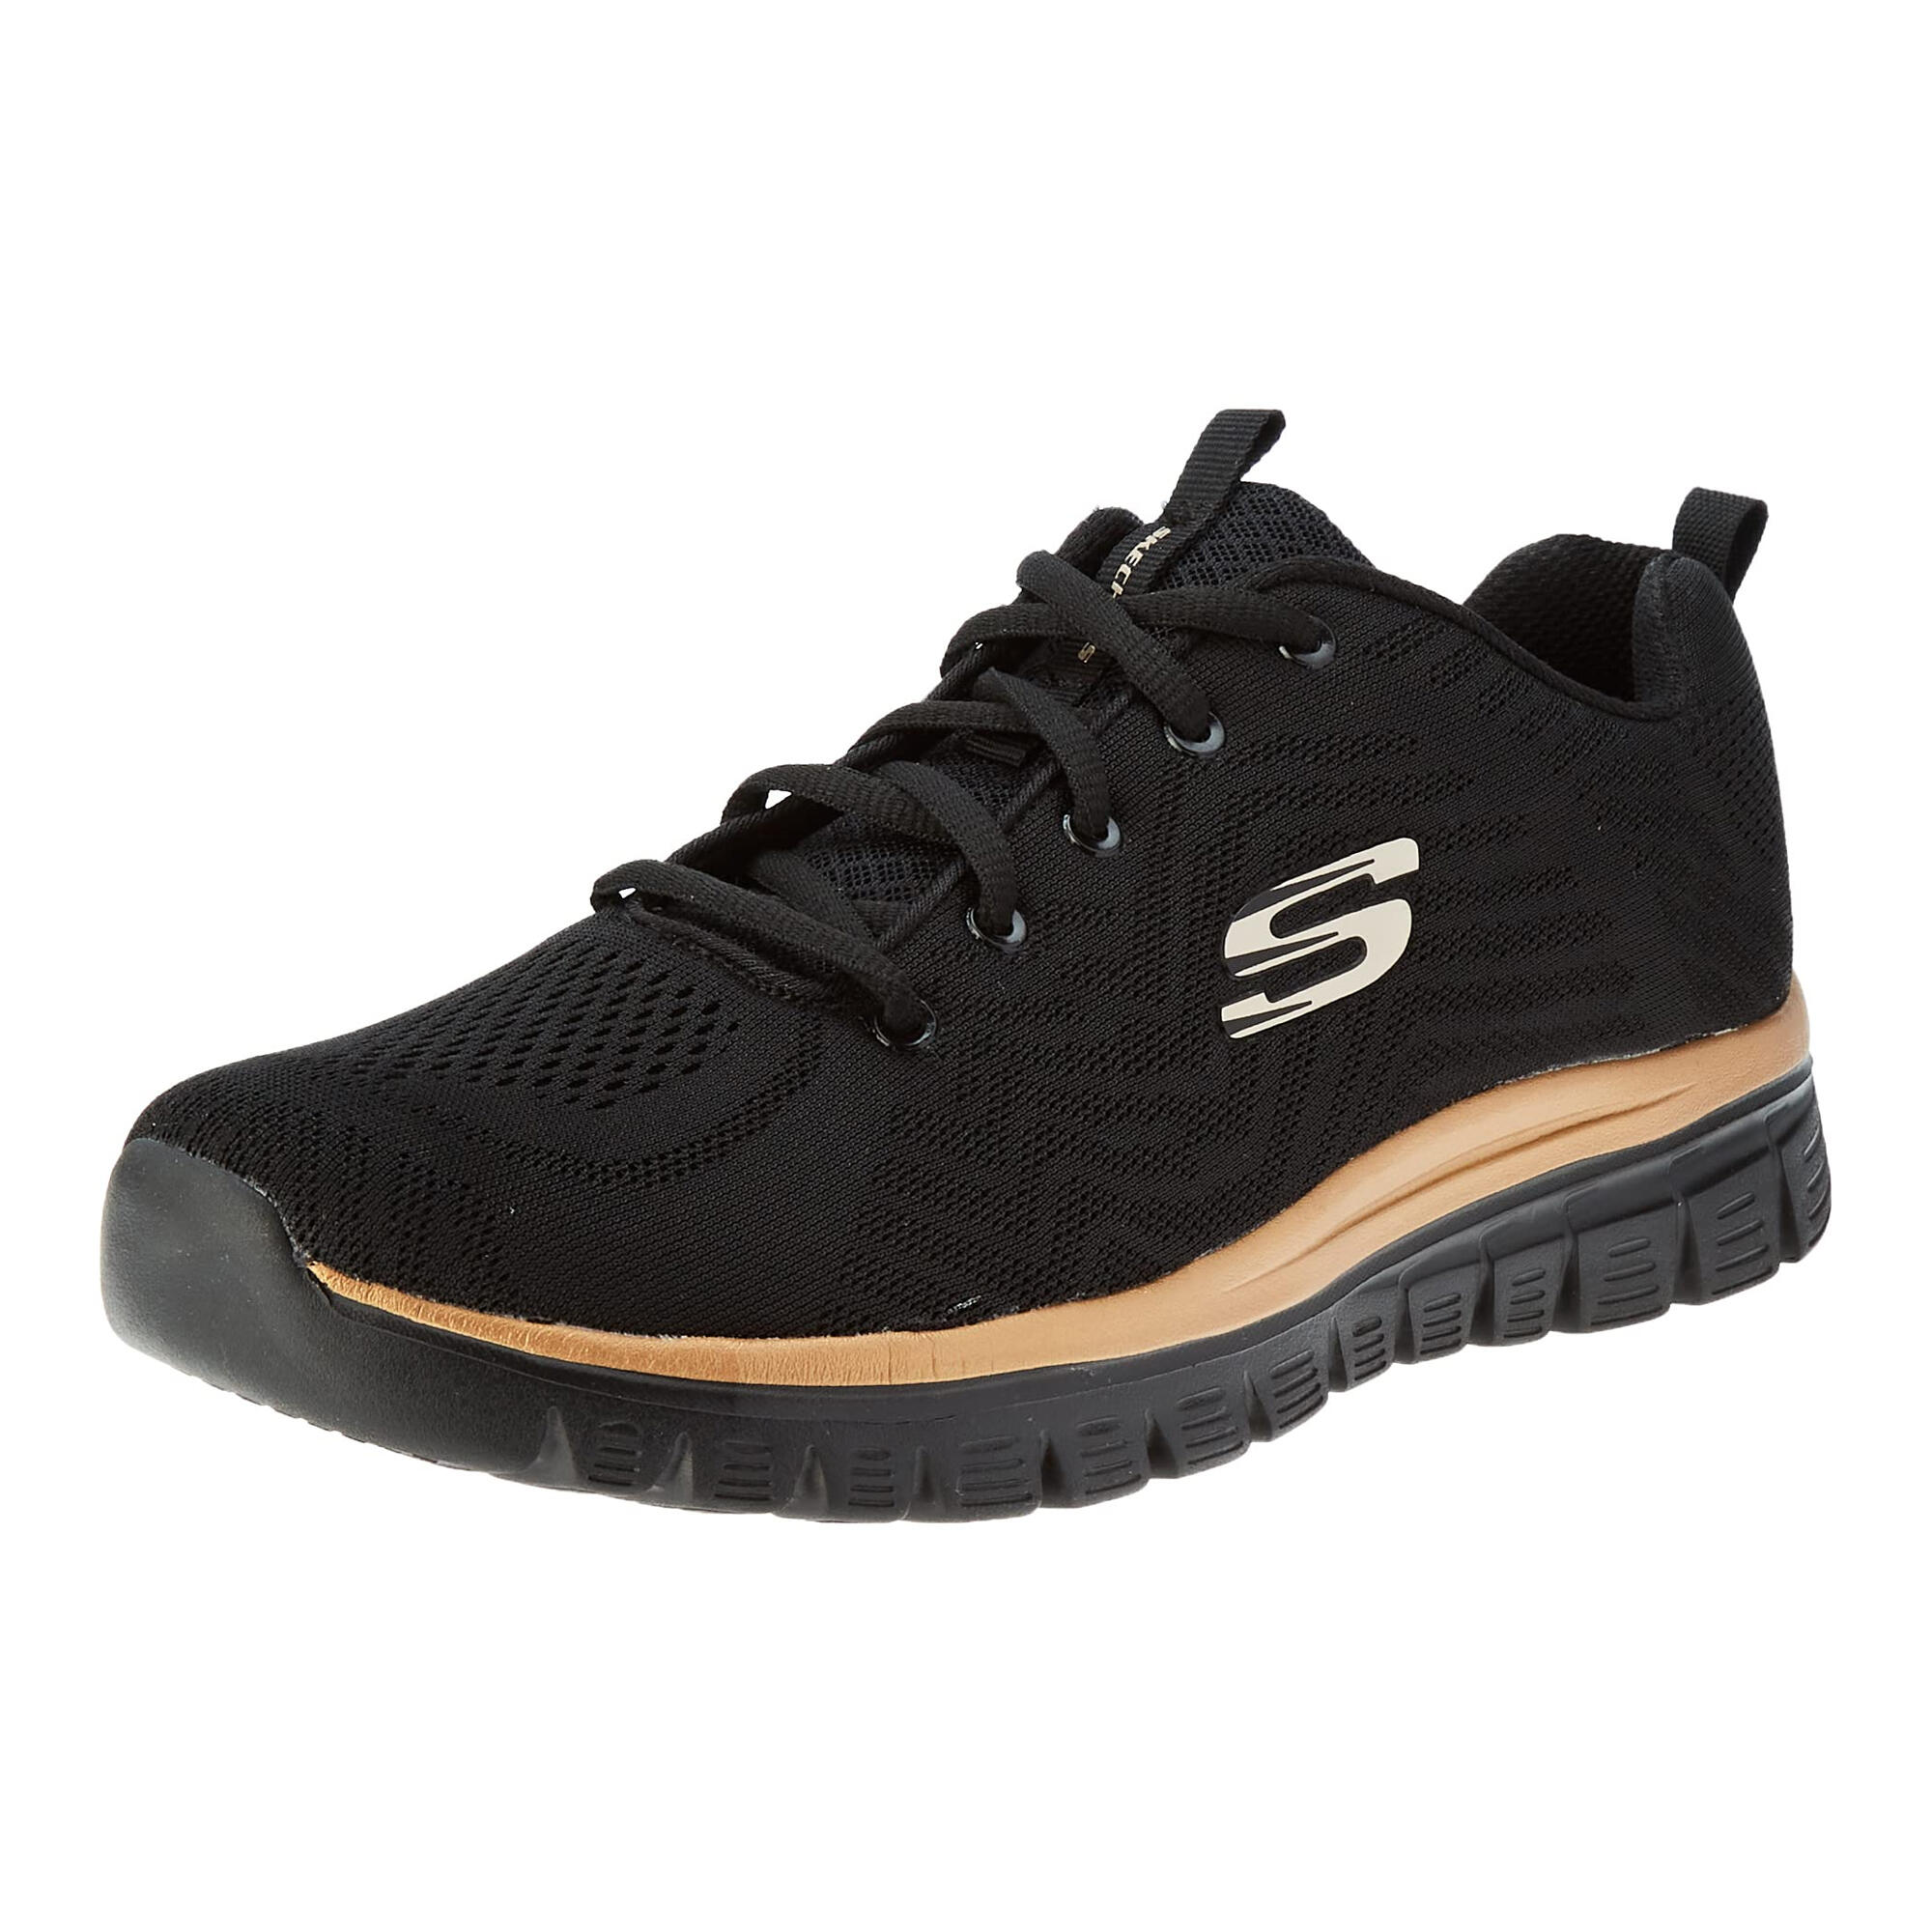 SKECHERS Womens/Ladies Graceful Get Connected Trainers (Black/Rose Gold)